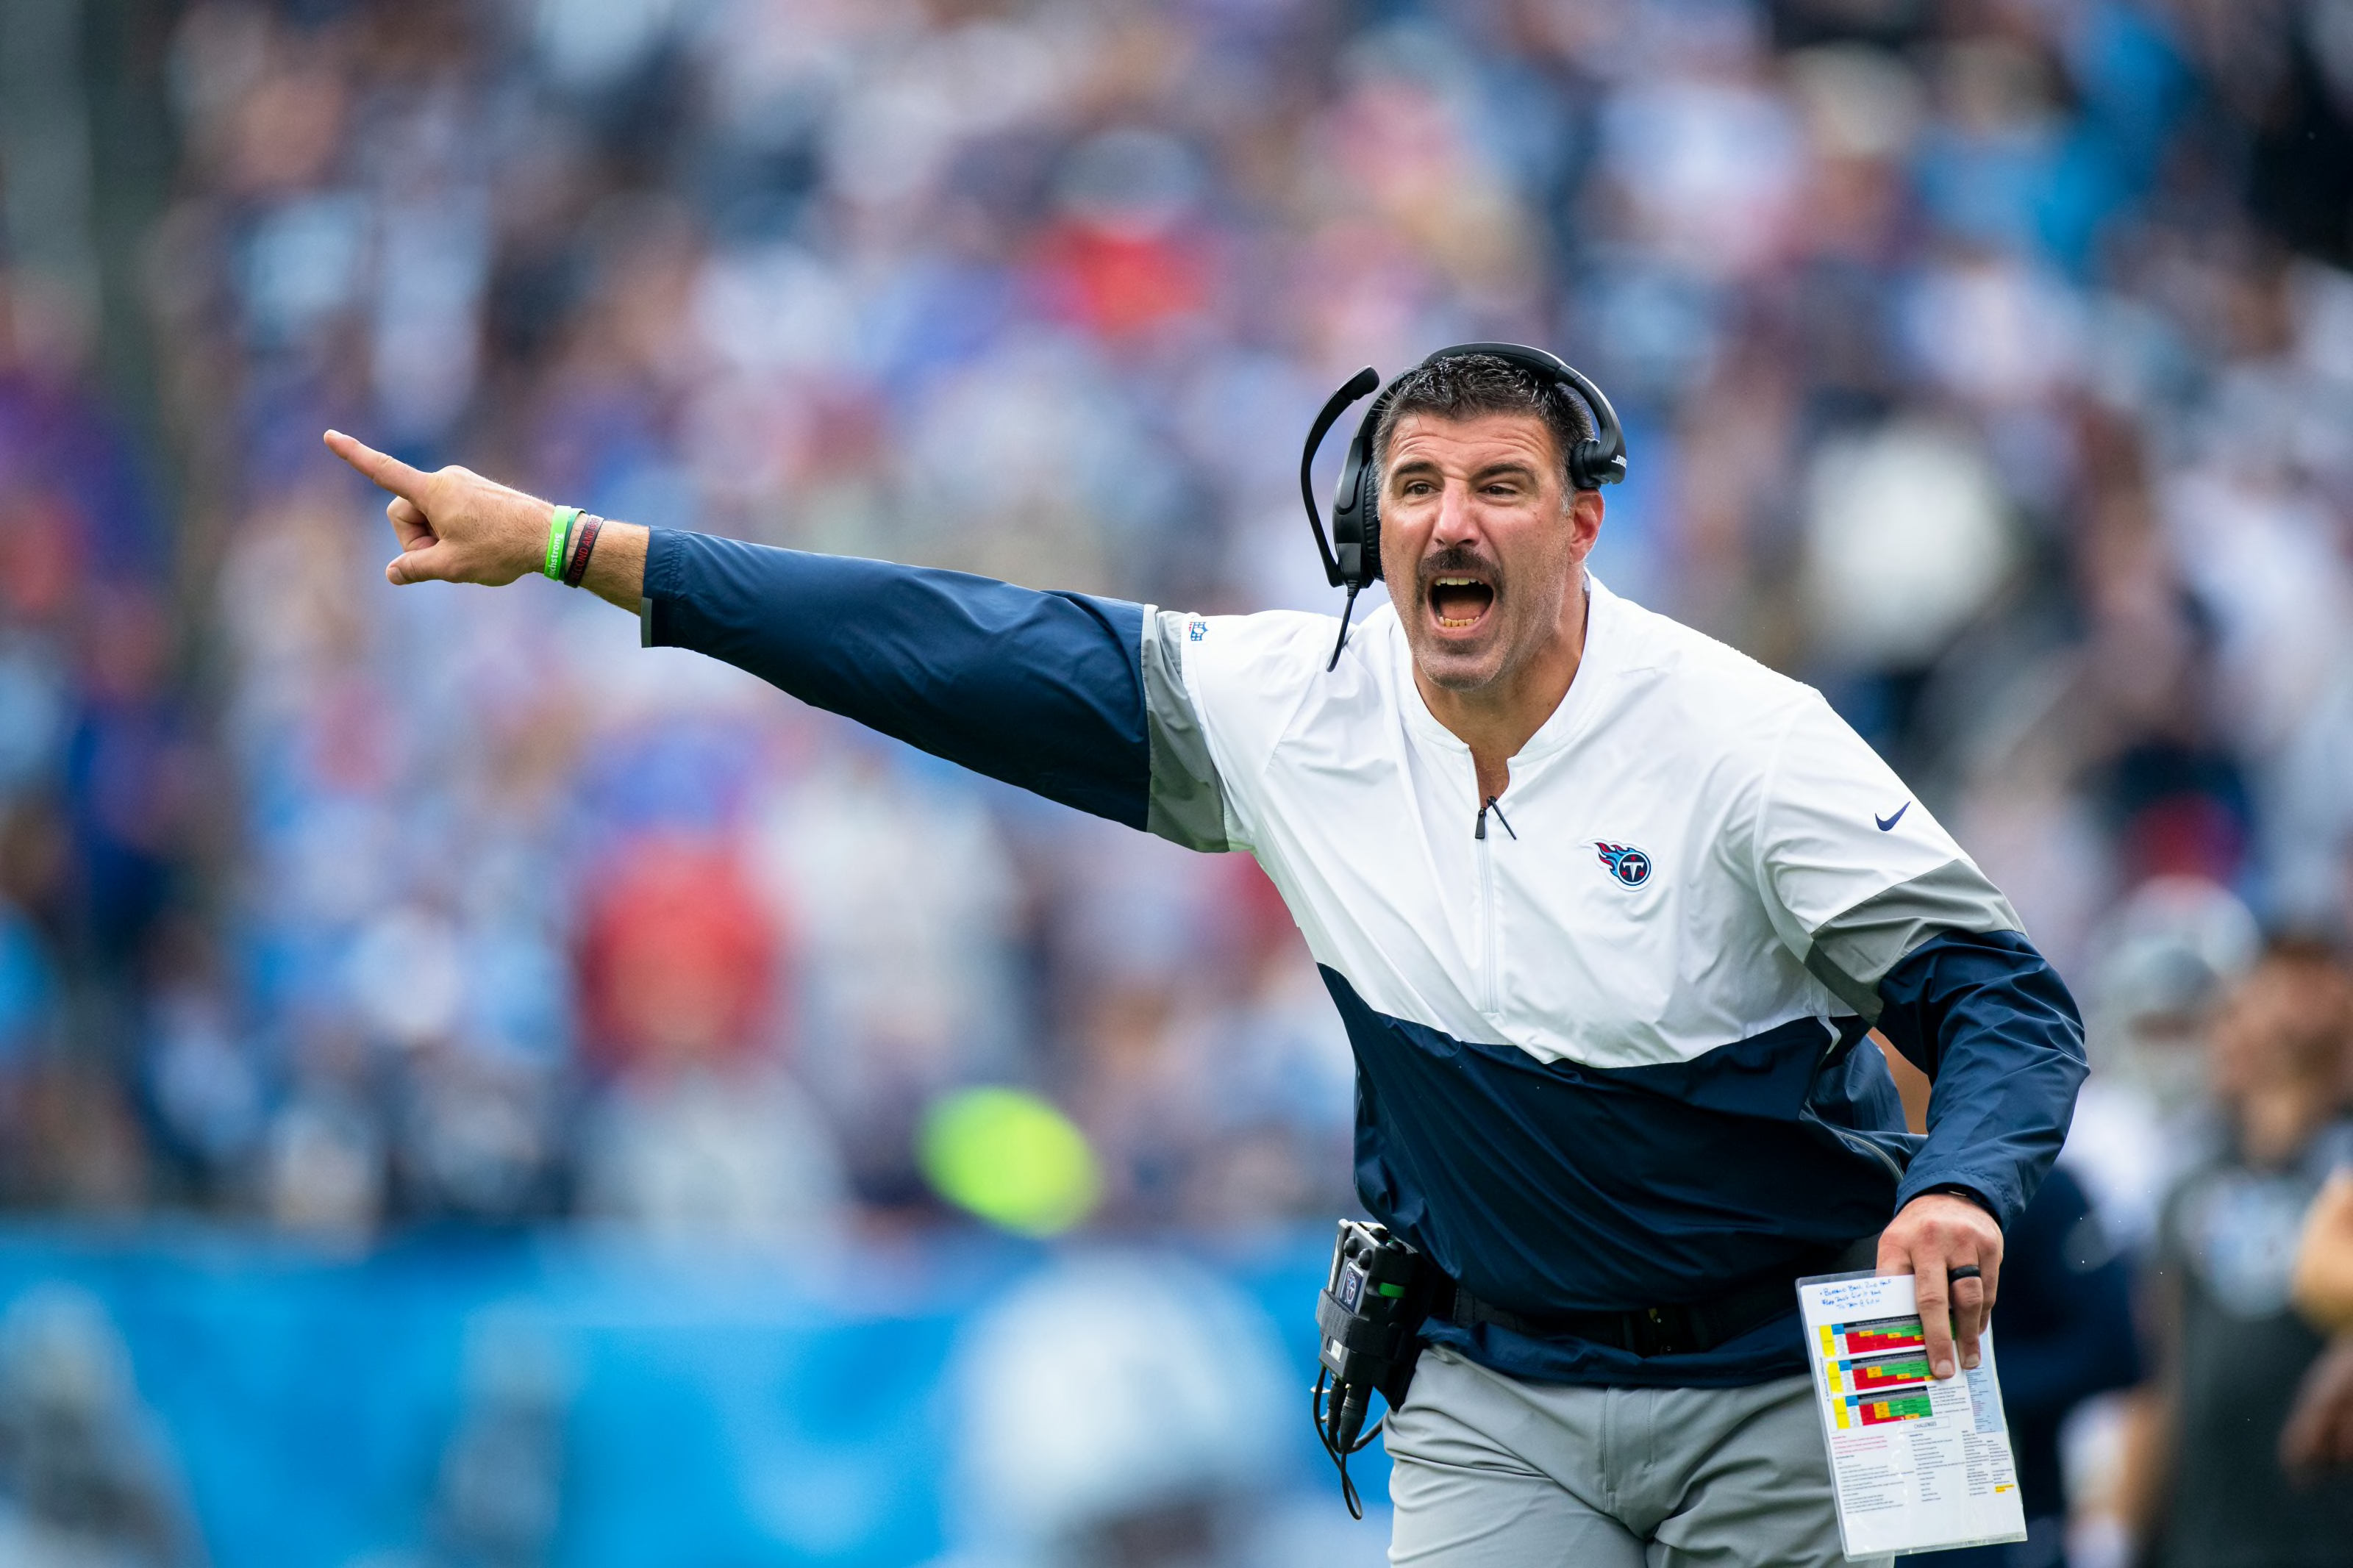 NFL Week 6, 2019: 5 Coaches on the hot seat to keep an eye on - Page 4